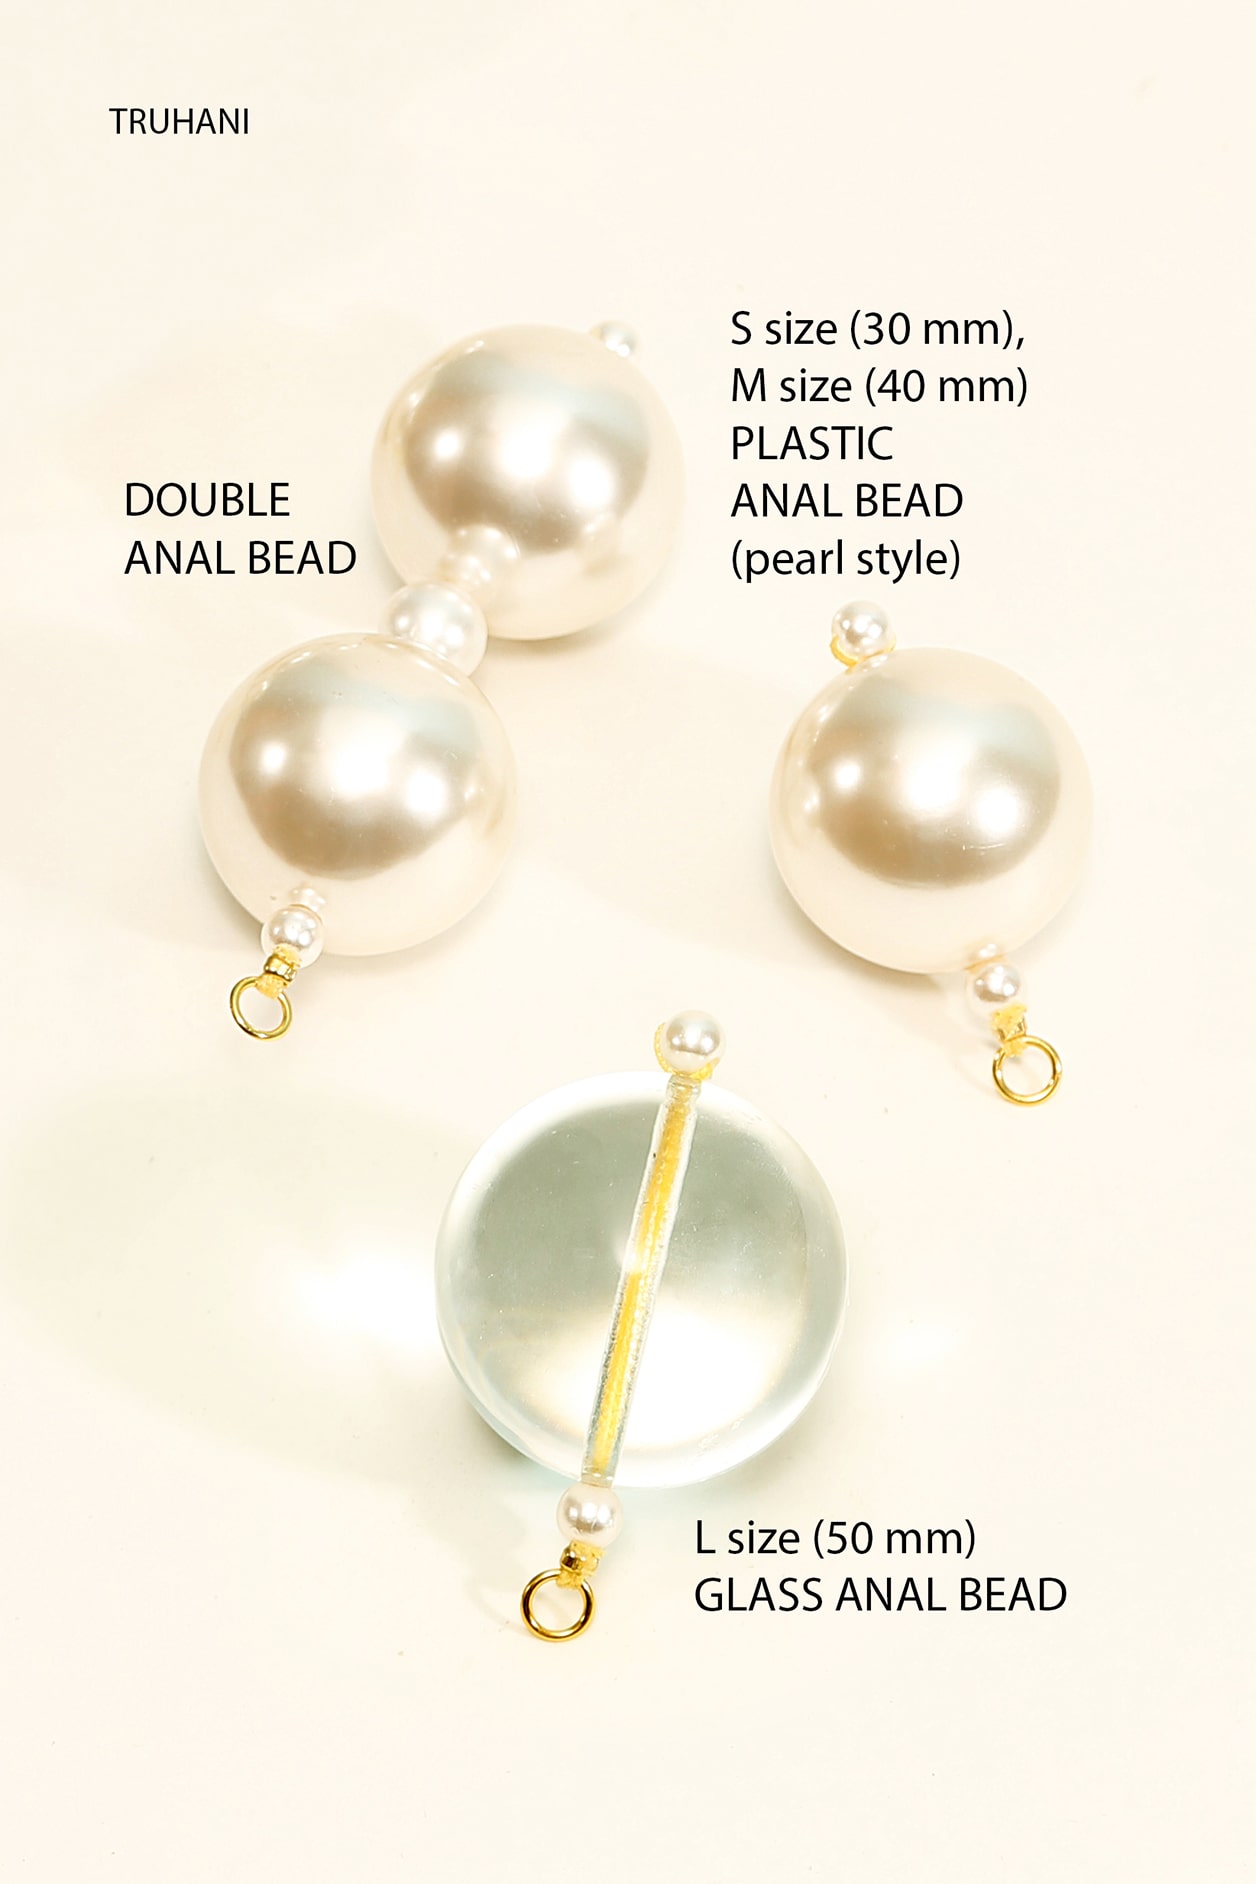 Sex toys. Anal and vaginal bead. Pearl style and glass.